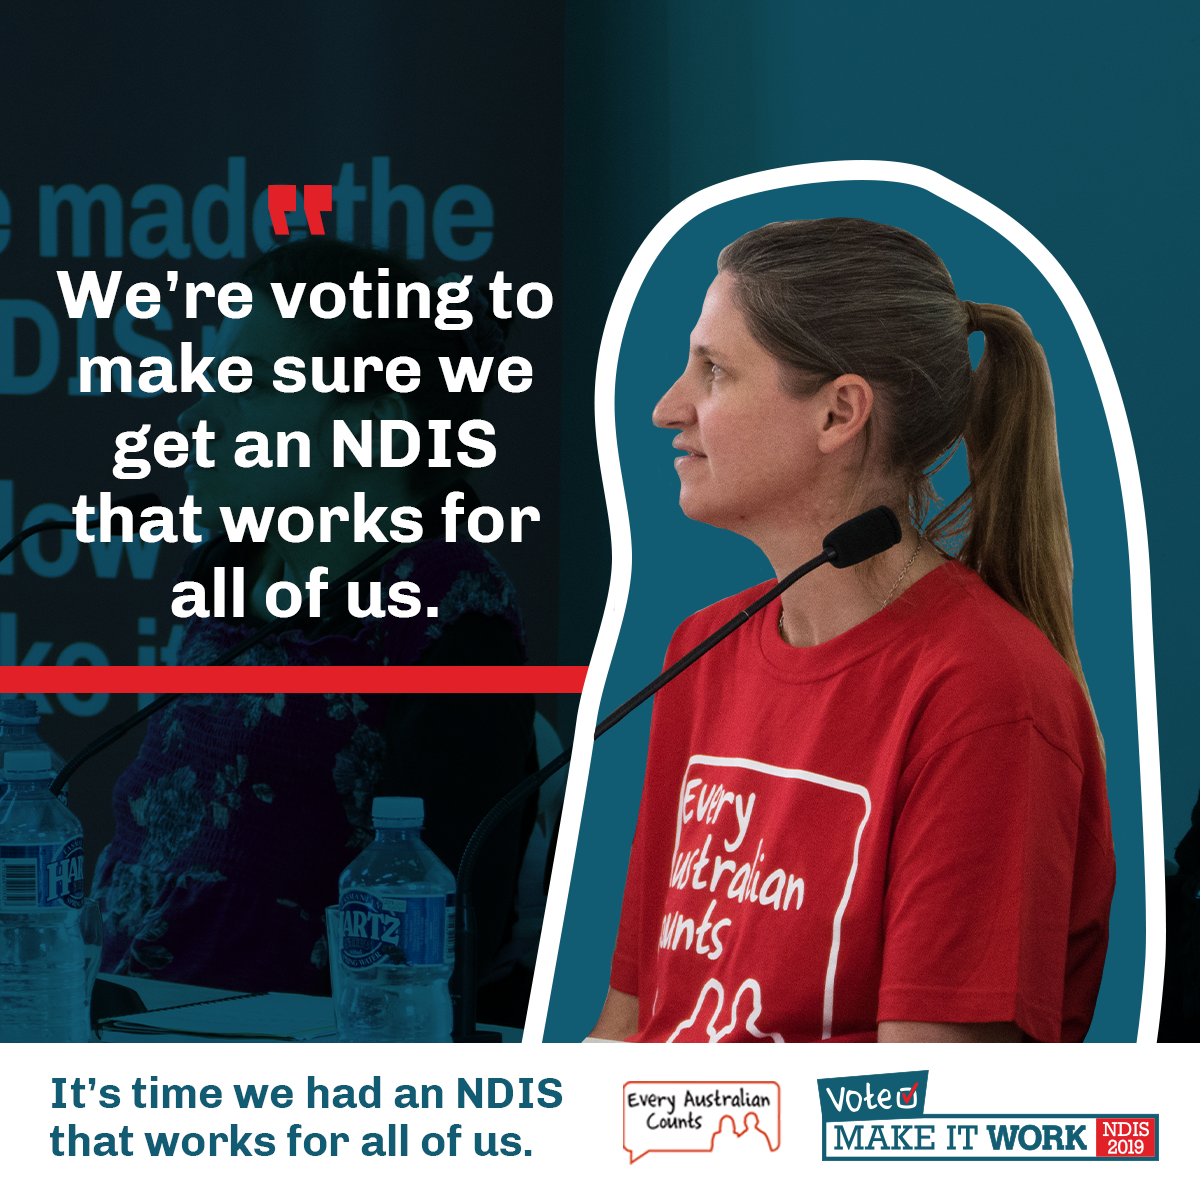 Sharegraphic - we're voting to make sure we get an NDIS that works for all of us